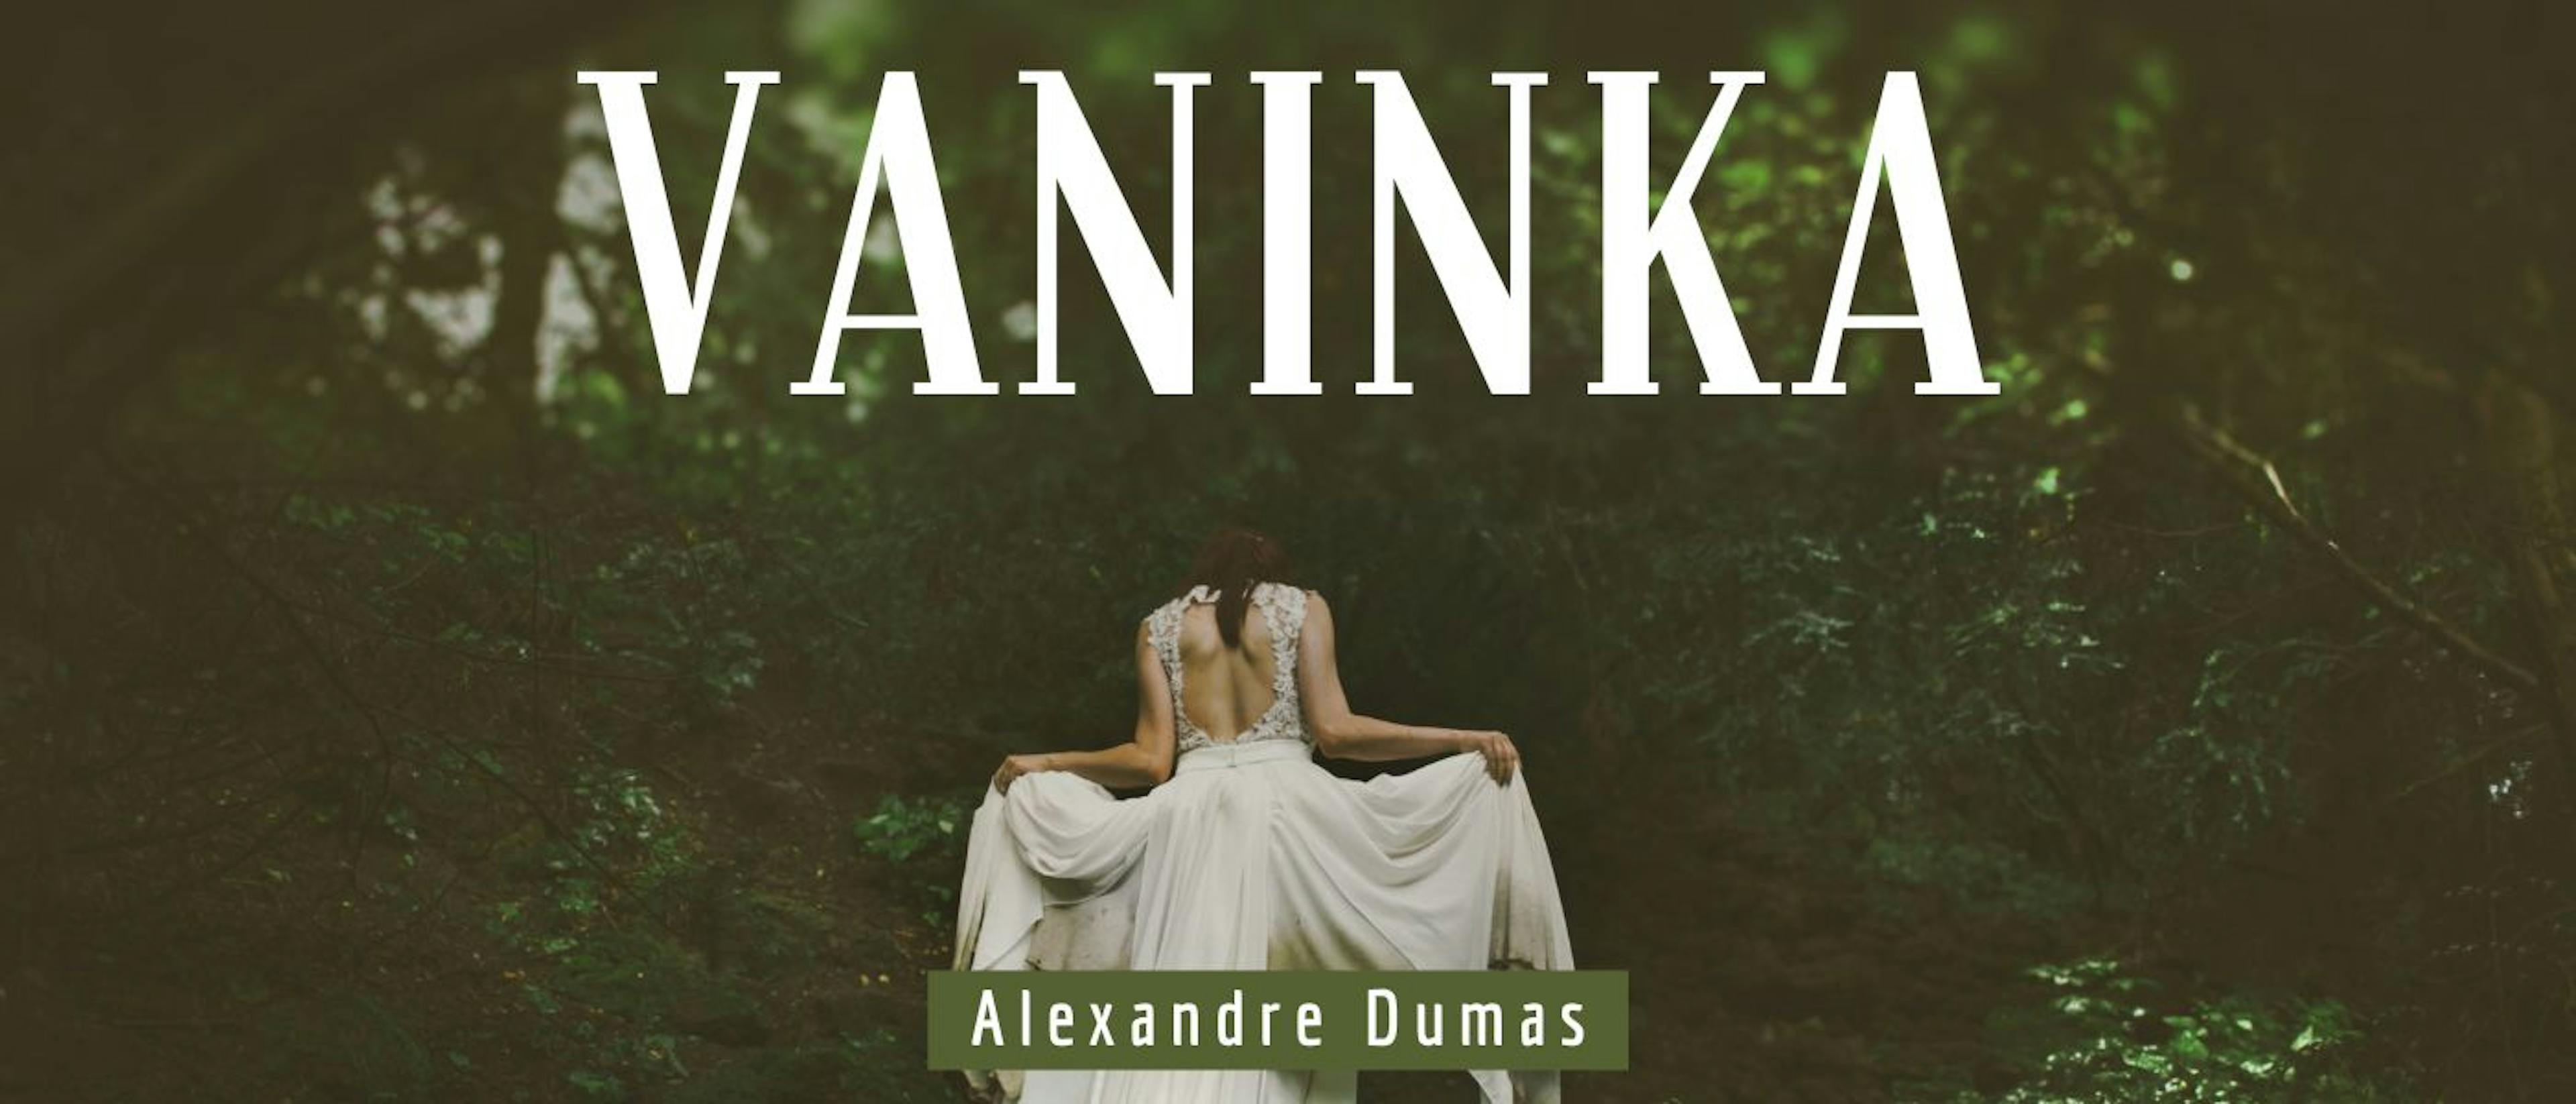 featured image - Vaninka by Alexandre Dumas - Table of Links